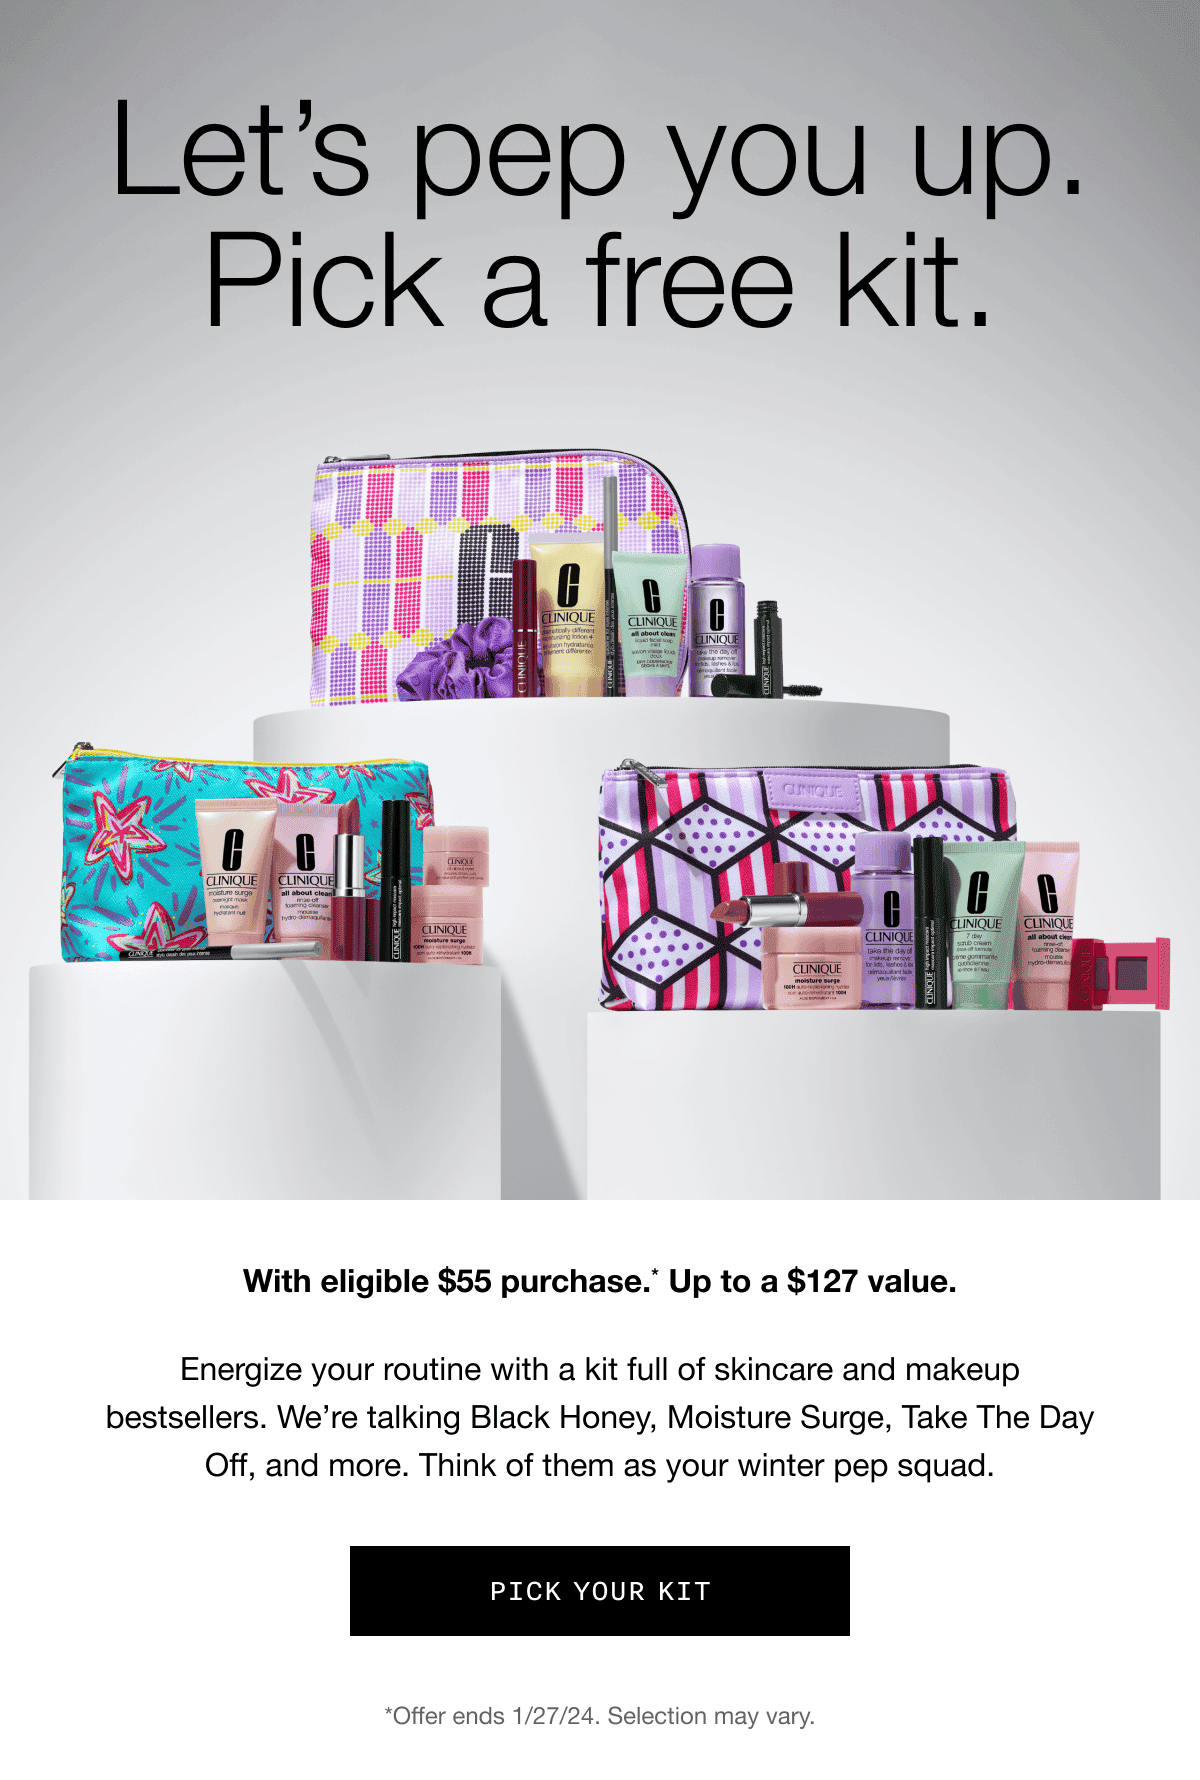 Let's pep you up. Pick a free kit. With eligible \\$55 purchase.* Up to a \\$127 value. | Energize your routine with a kit full of skincare and makeup bestsellers. We’re talking Black Honey, Moisture Surge, Take The Day Off, and more. Think of them as your winter pep squad. | PICK YOUR KIT | *Offer ends 1/27/24. Selection may vary.